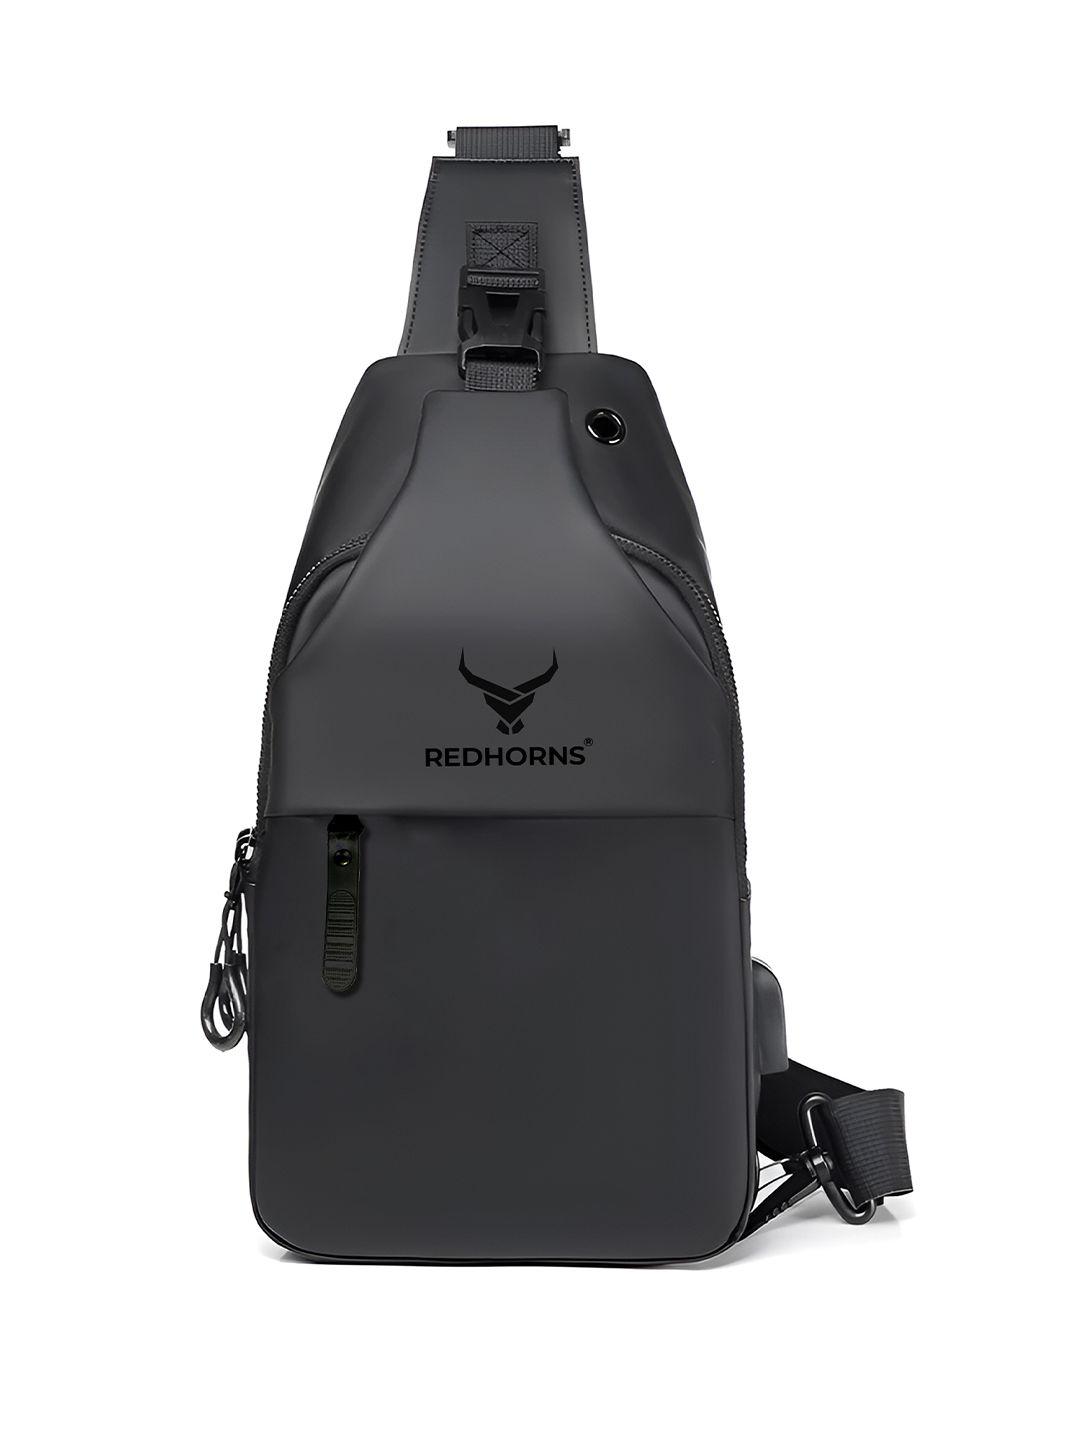 redhorns crossbody chest backpack with usb charging port